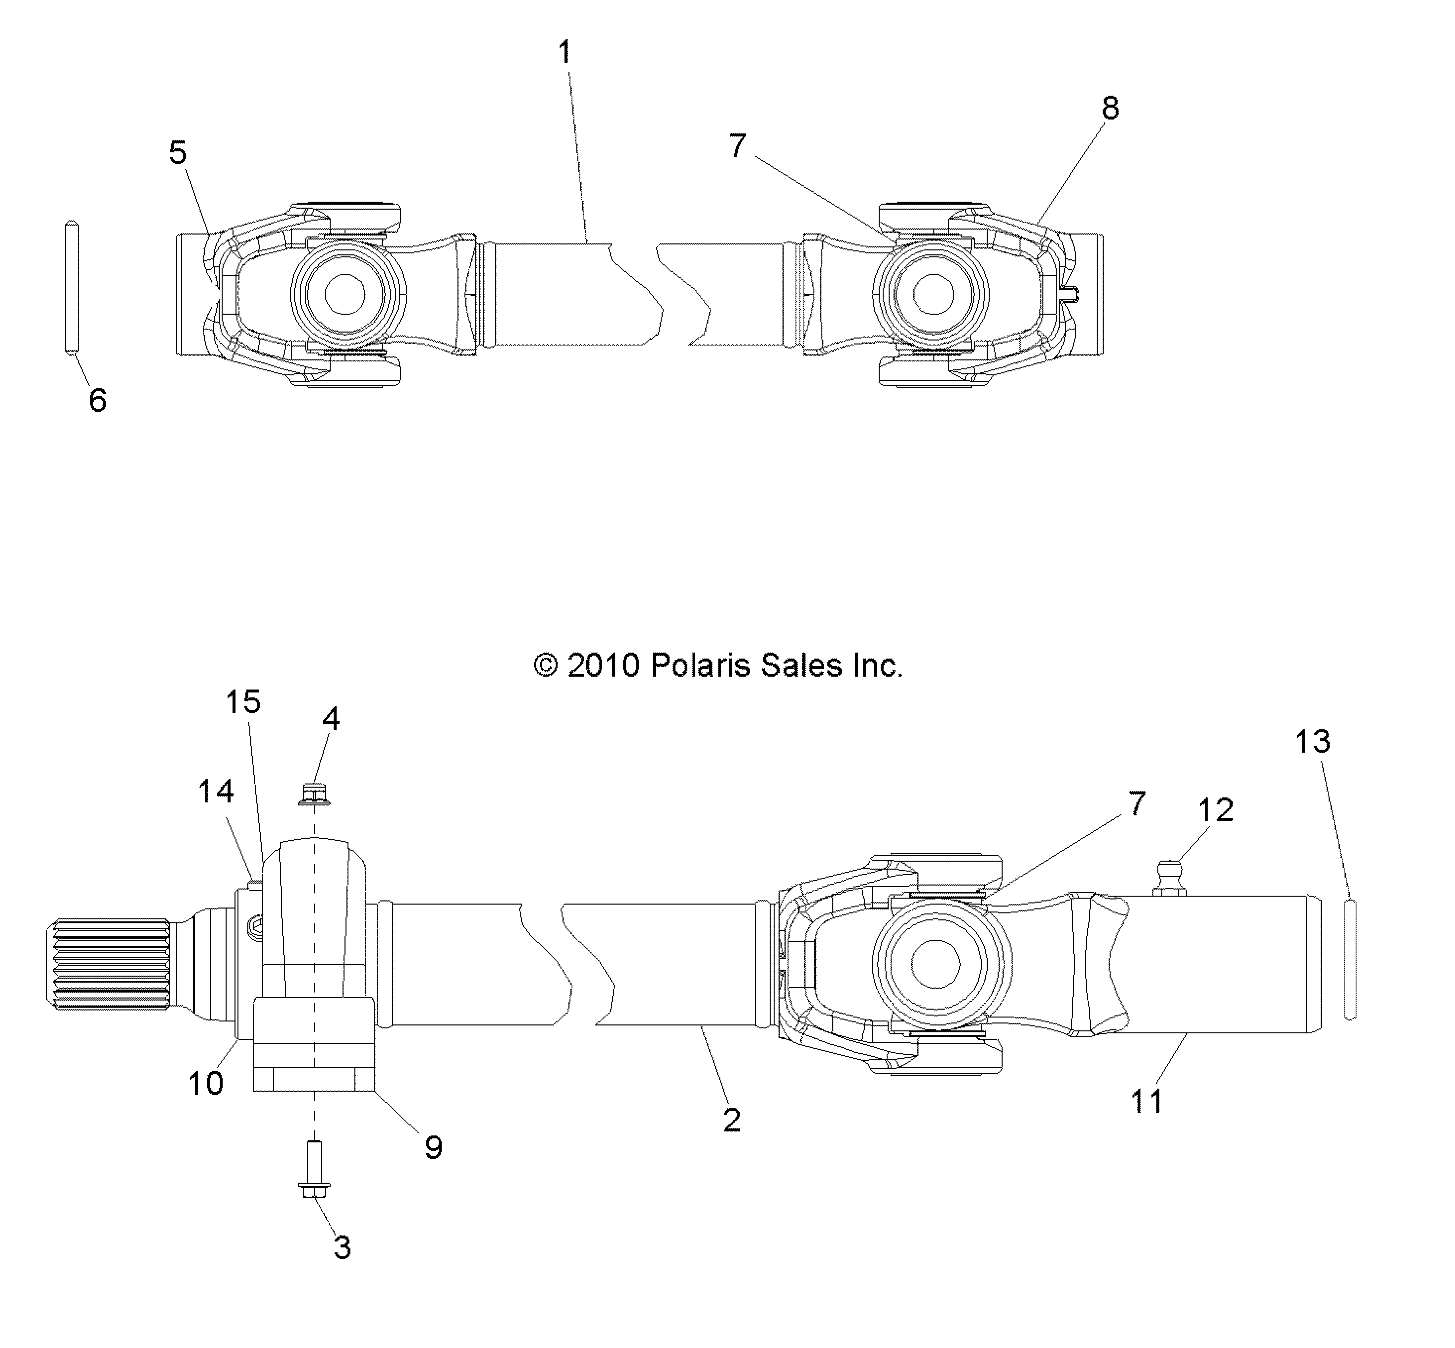 Part Number : 1332869 PROP SHAFT WITH BEARING ASSEMB